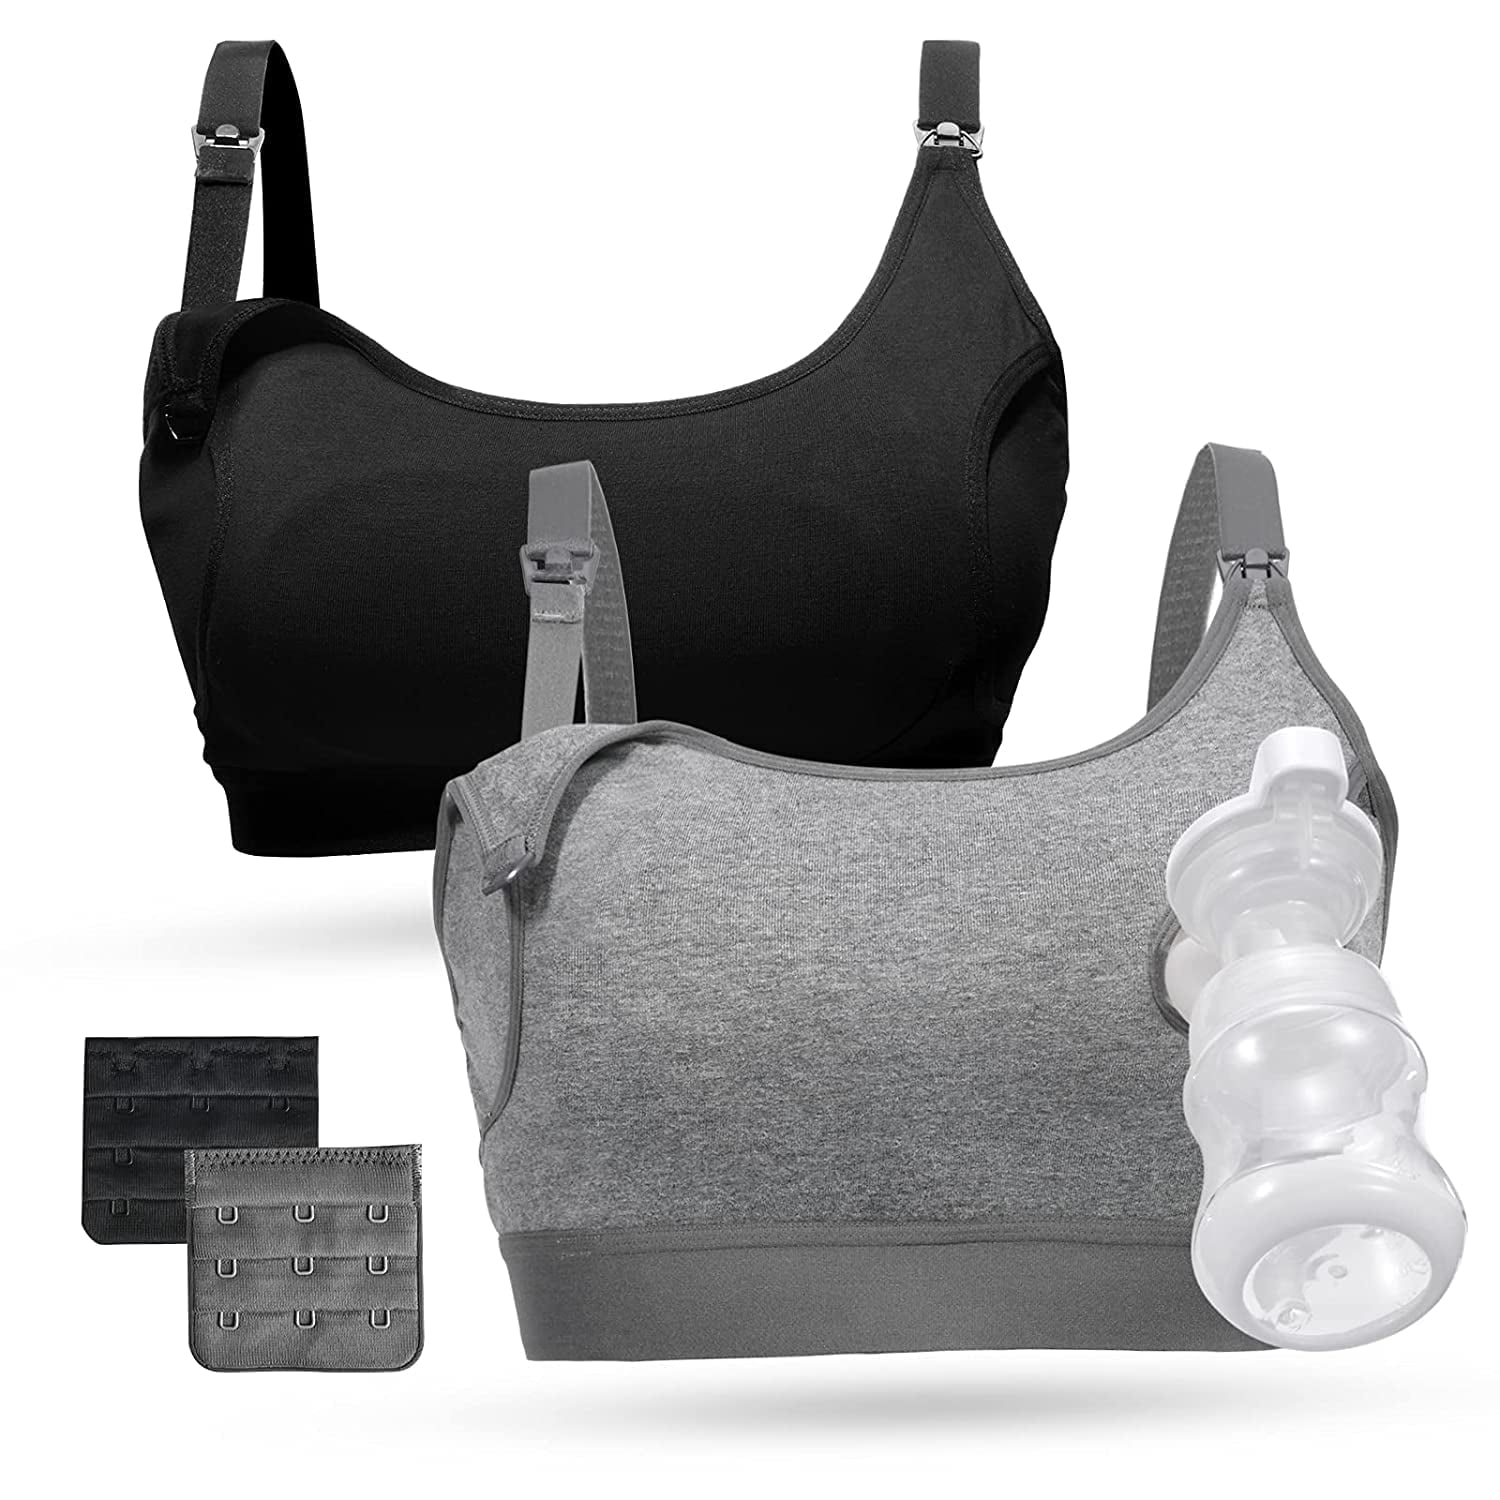 Hands Free Pumping Bra, Comfortable Breast Pump Bra with Pads, Lupantte  Adjustable Nursing Bra for Pumping .Fit Most Breast Pumps Like Spectra